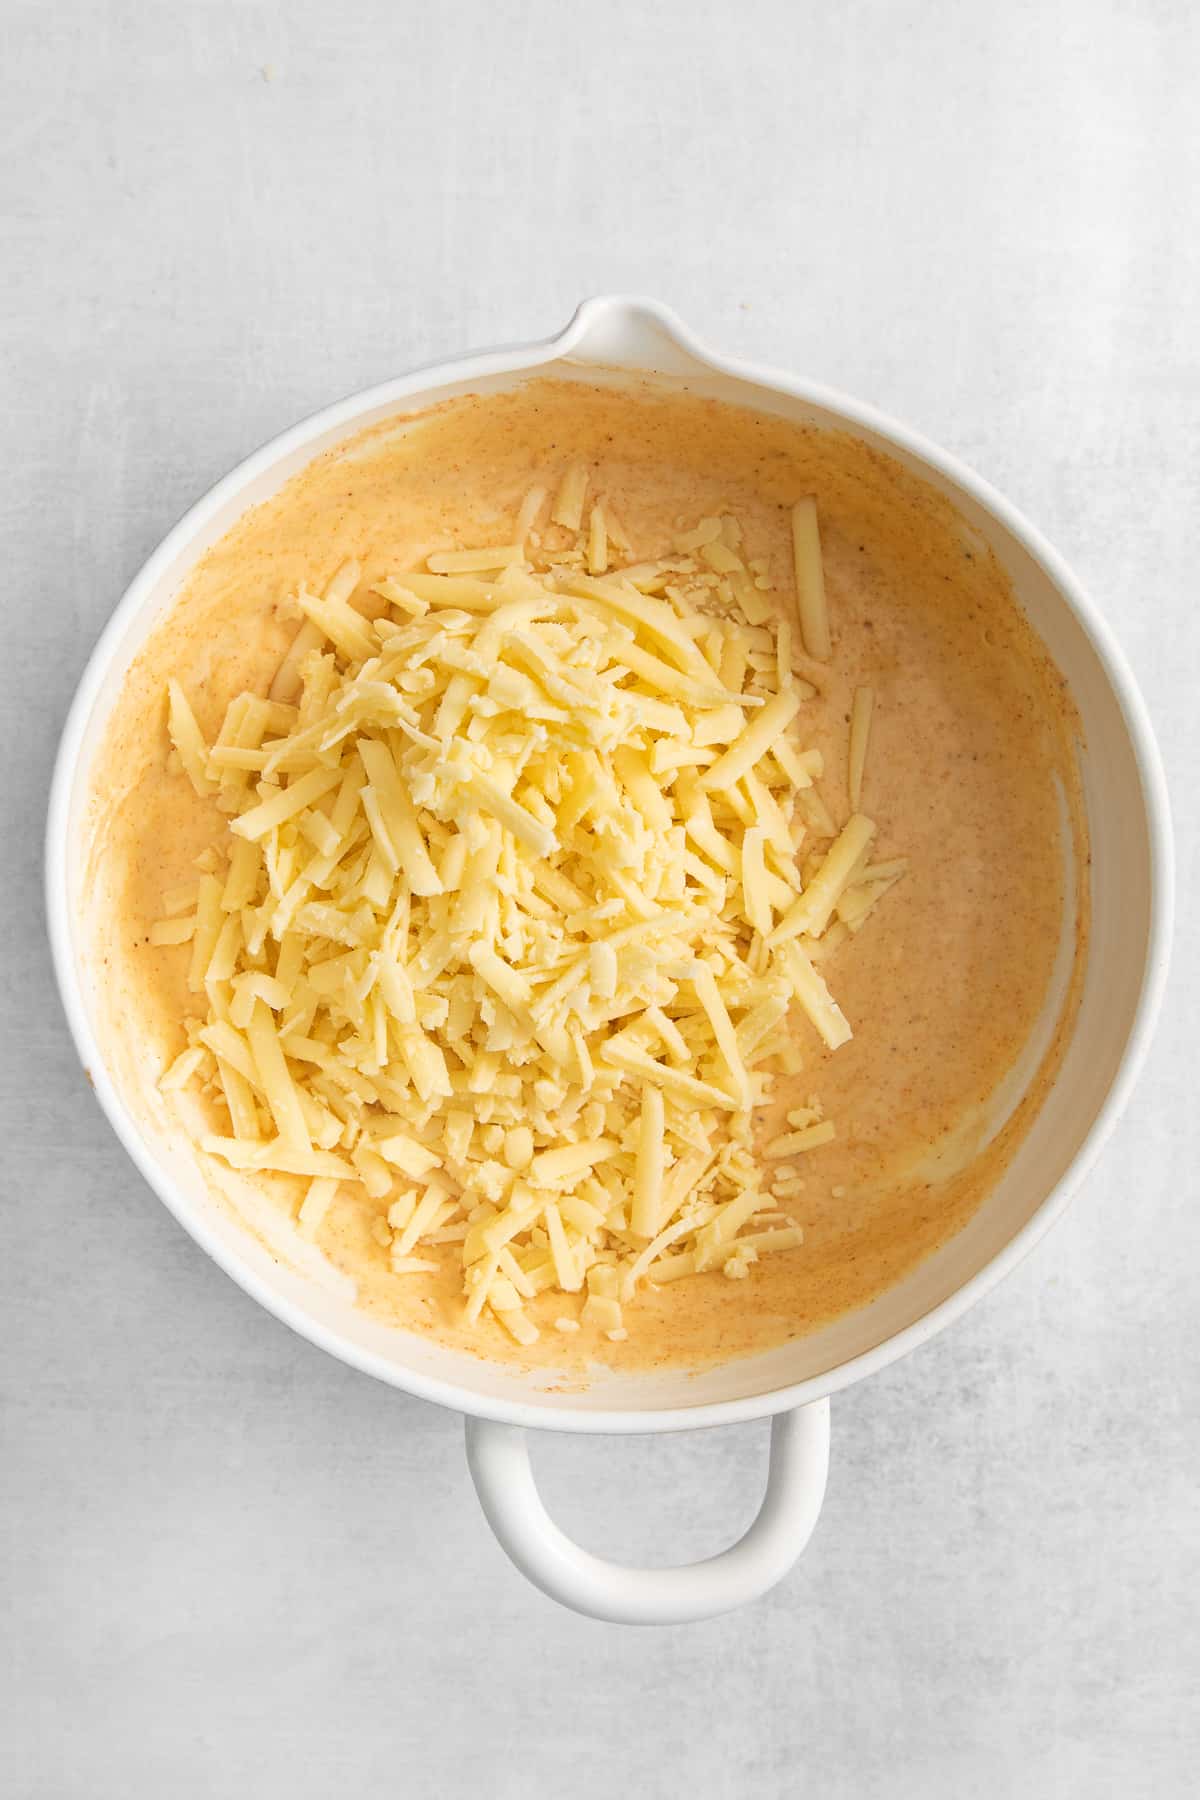 Cheese souffle ingredients in a bowl.